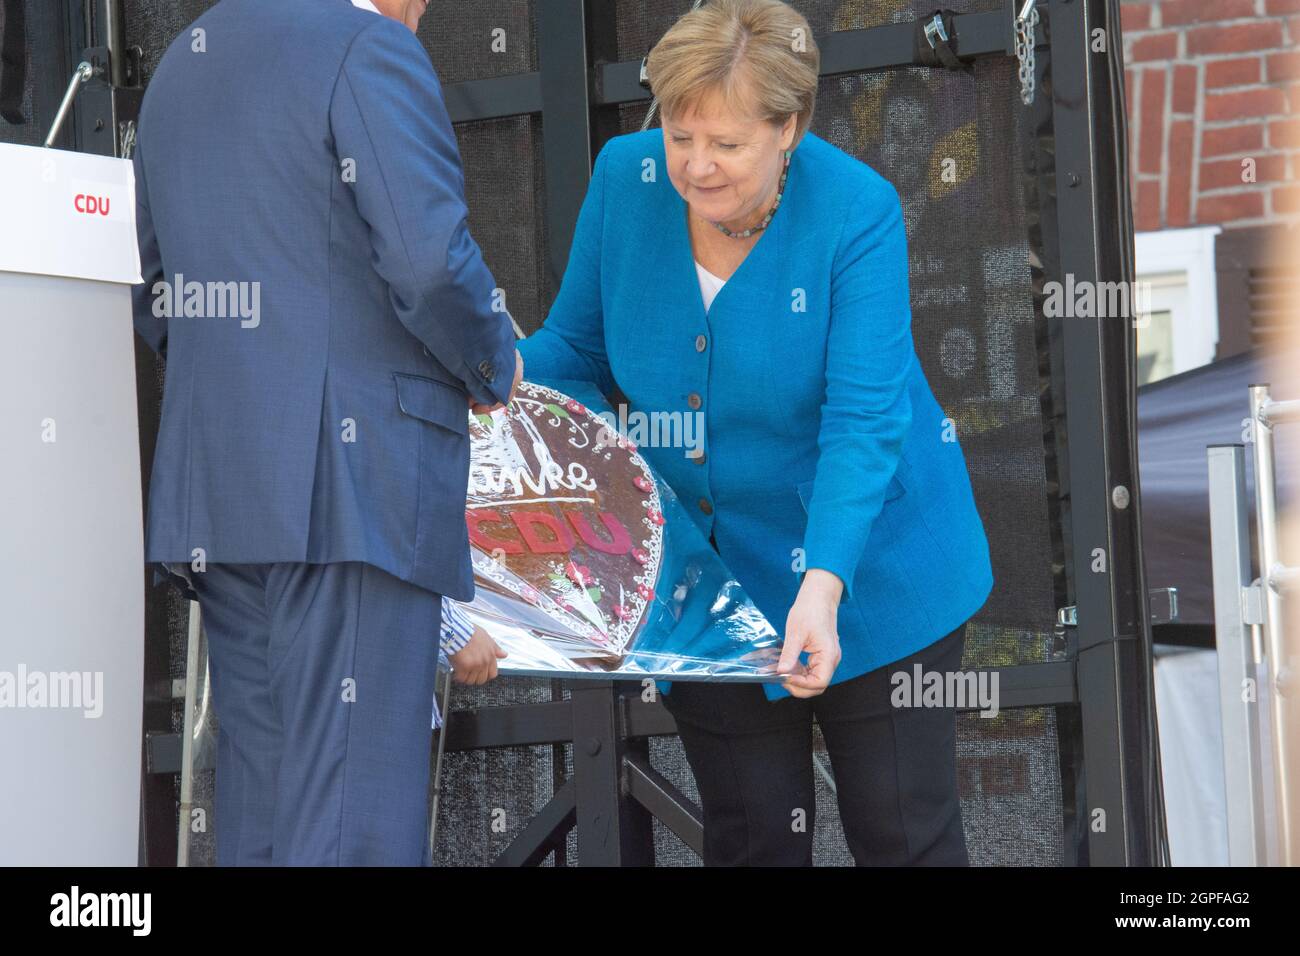 Chancellor Angala Merkel, Rudolf Henke and Armin Laschet at an election rally on the stage Stock Photo